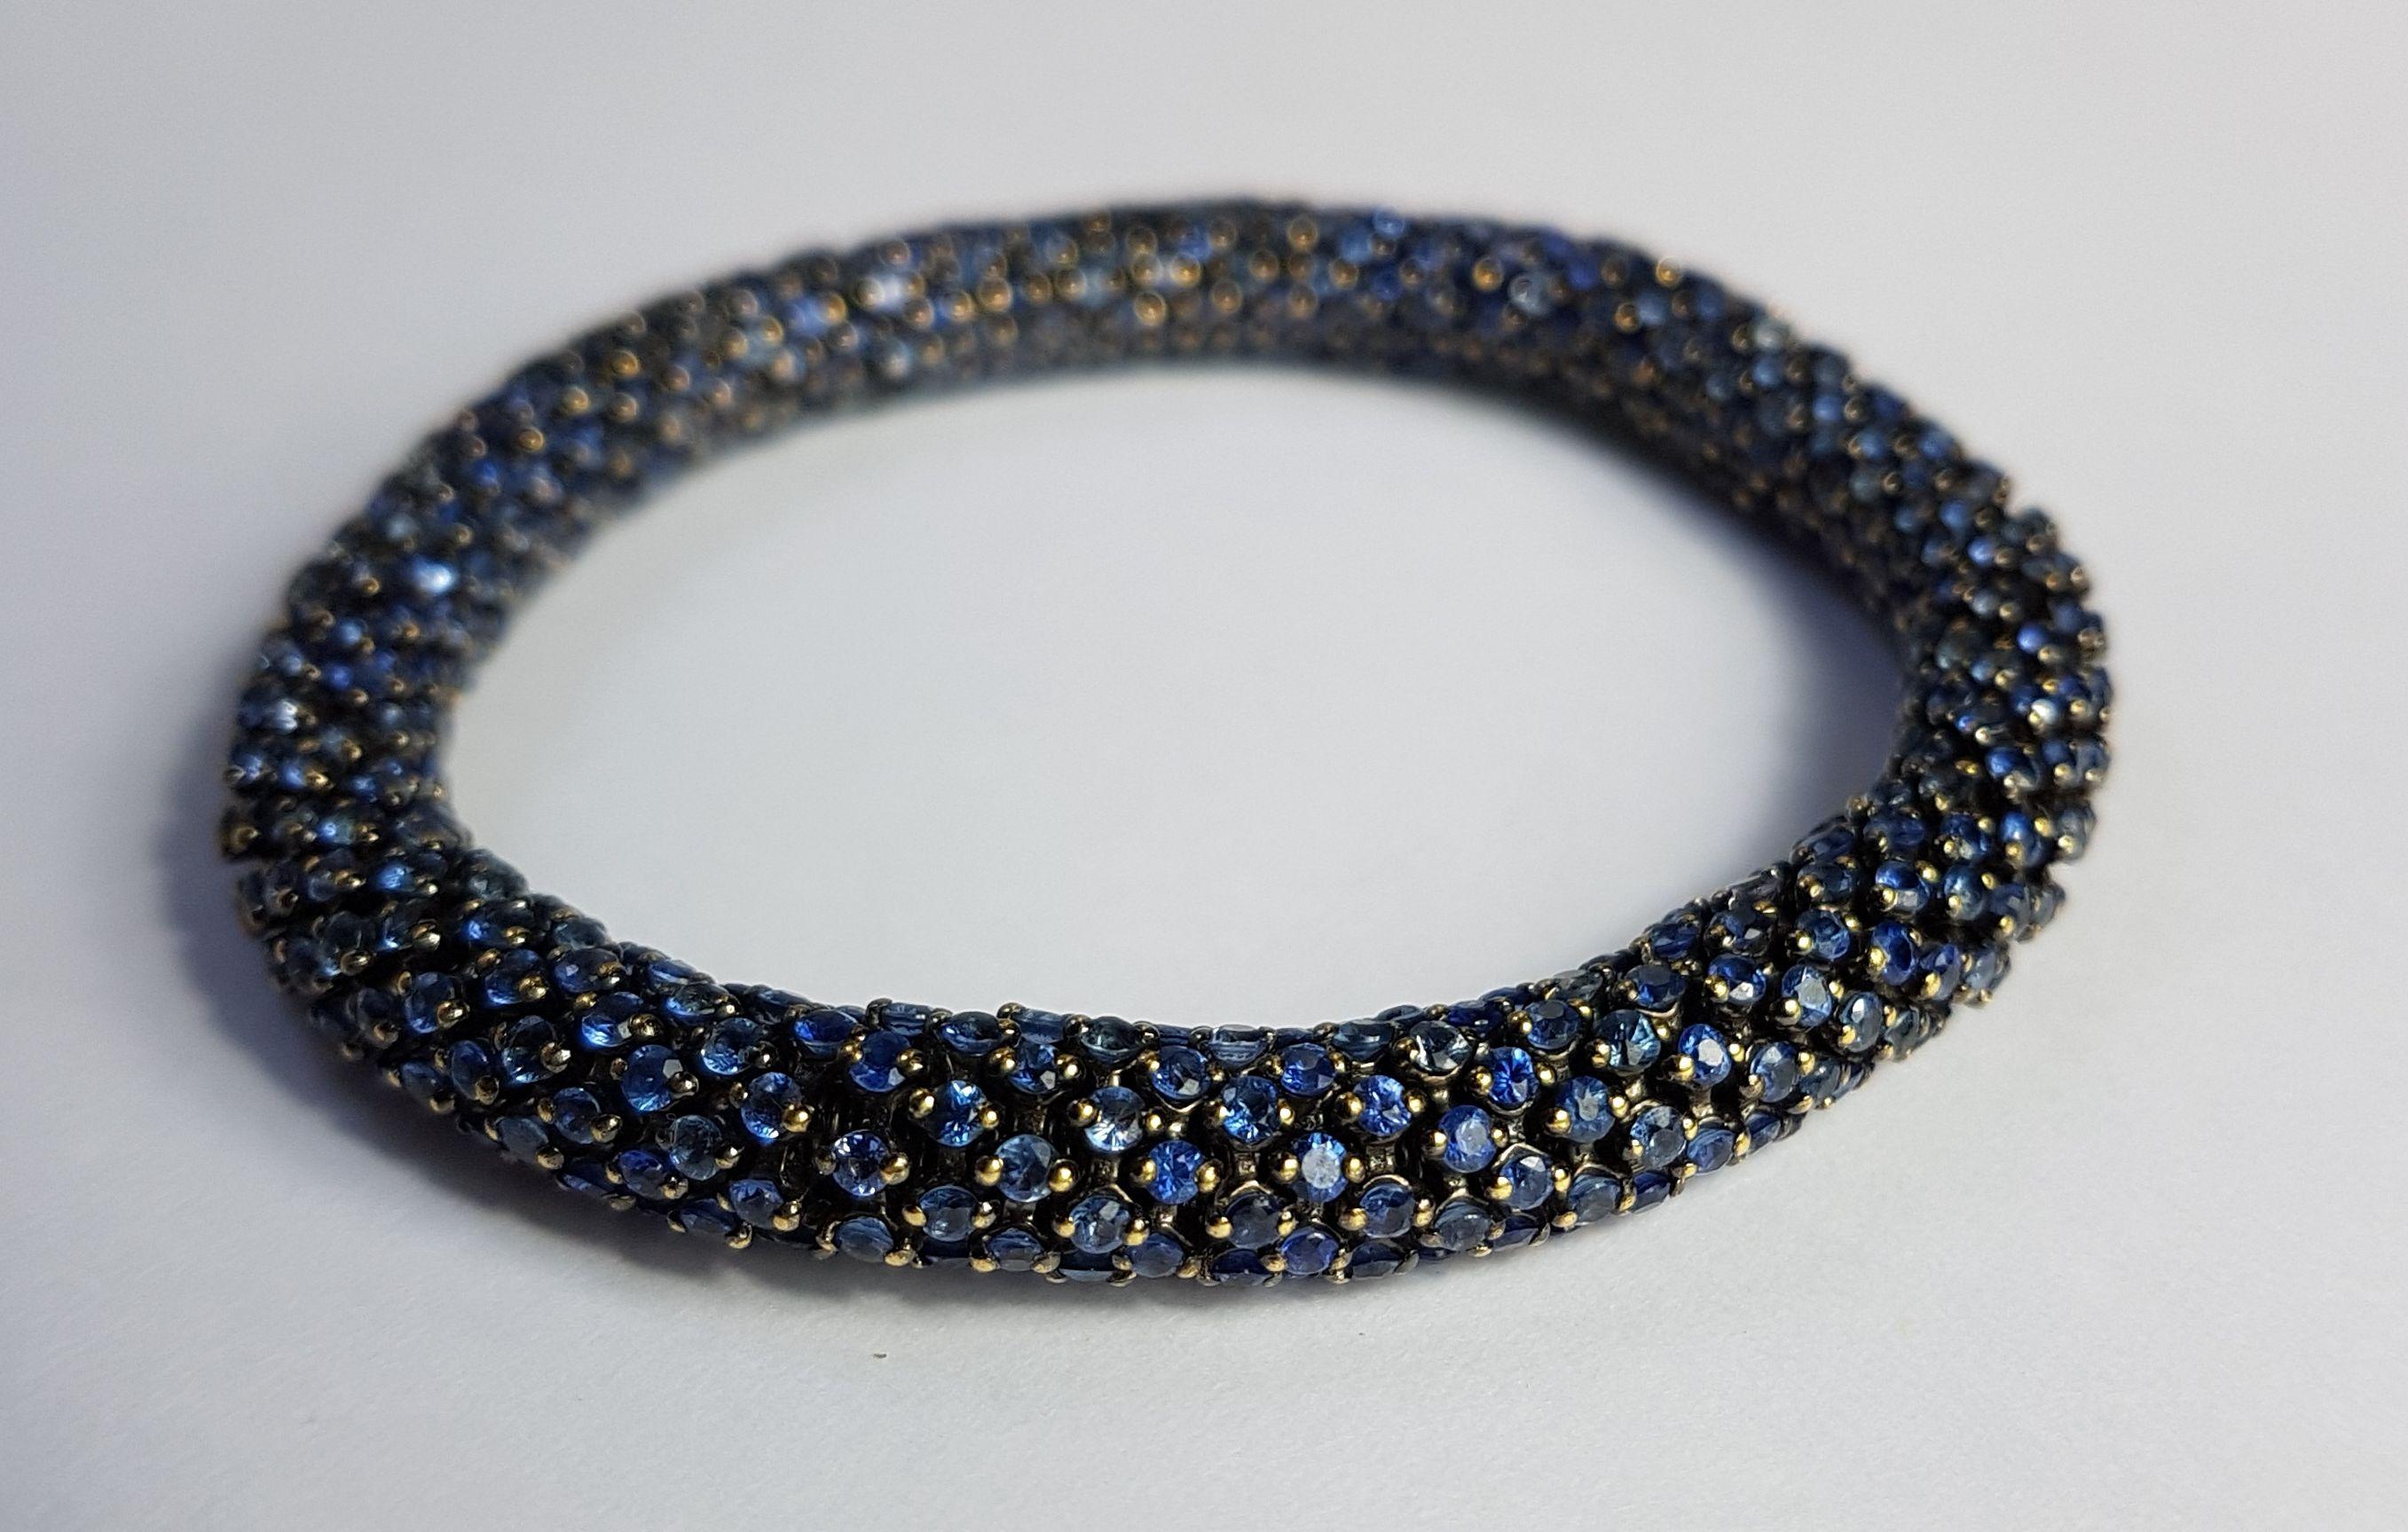 Astonishing blue sapphire and white gold bracelet.
The bracelet is very flexible and therefore adapts to different wrist sizes.
Total weight of sapphires: 19.55 carats.
Chic and sporty at the same time! Fashionable!
Different models available!